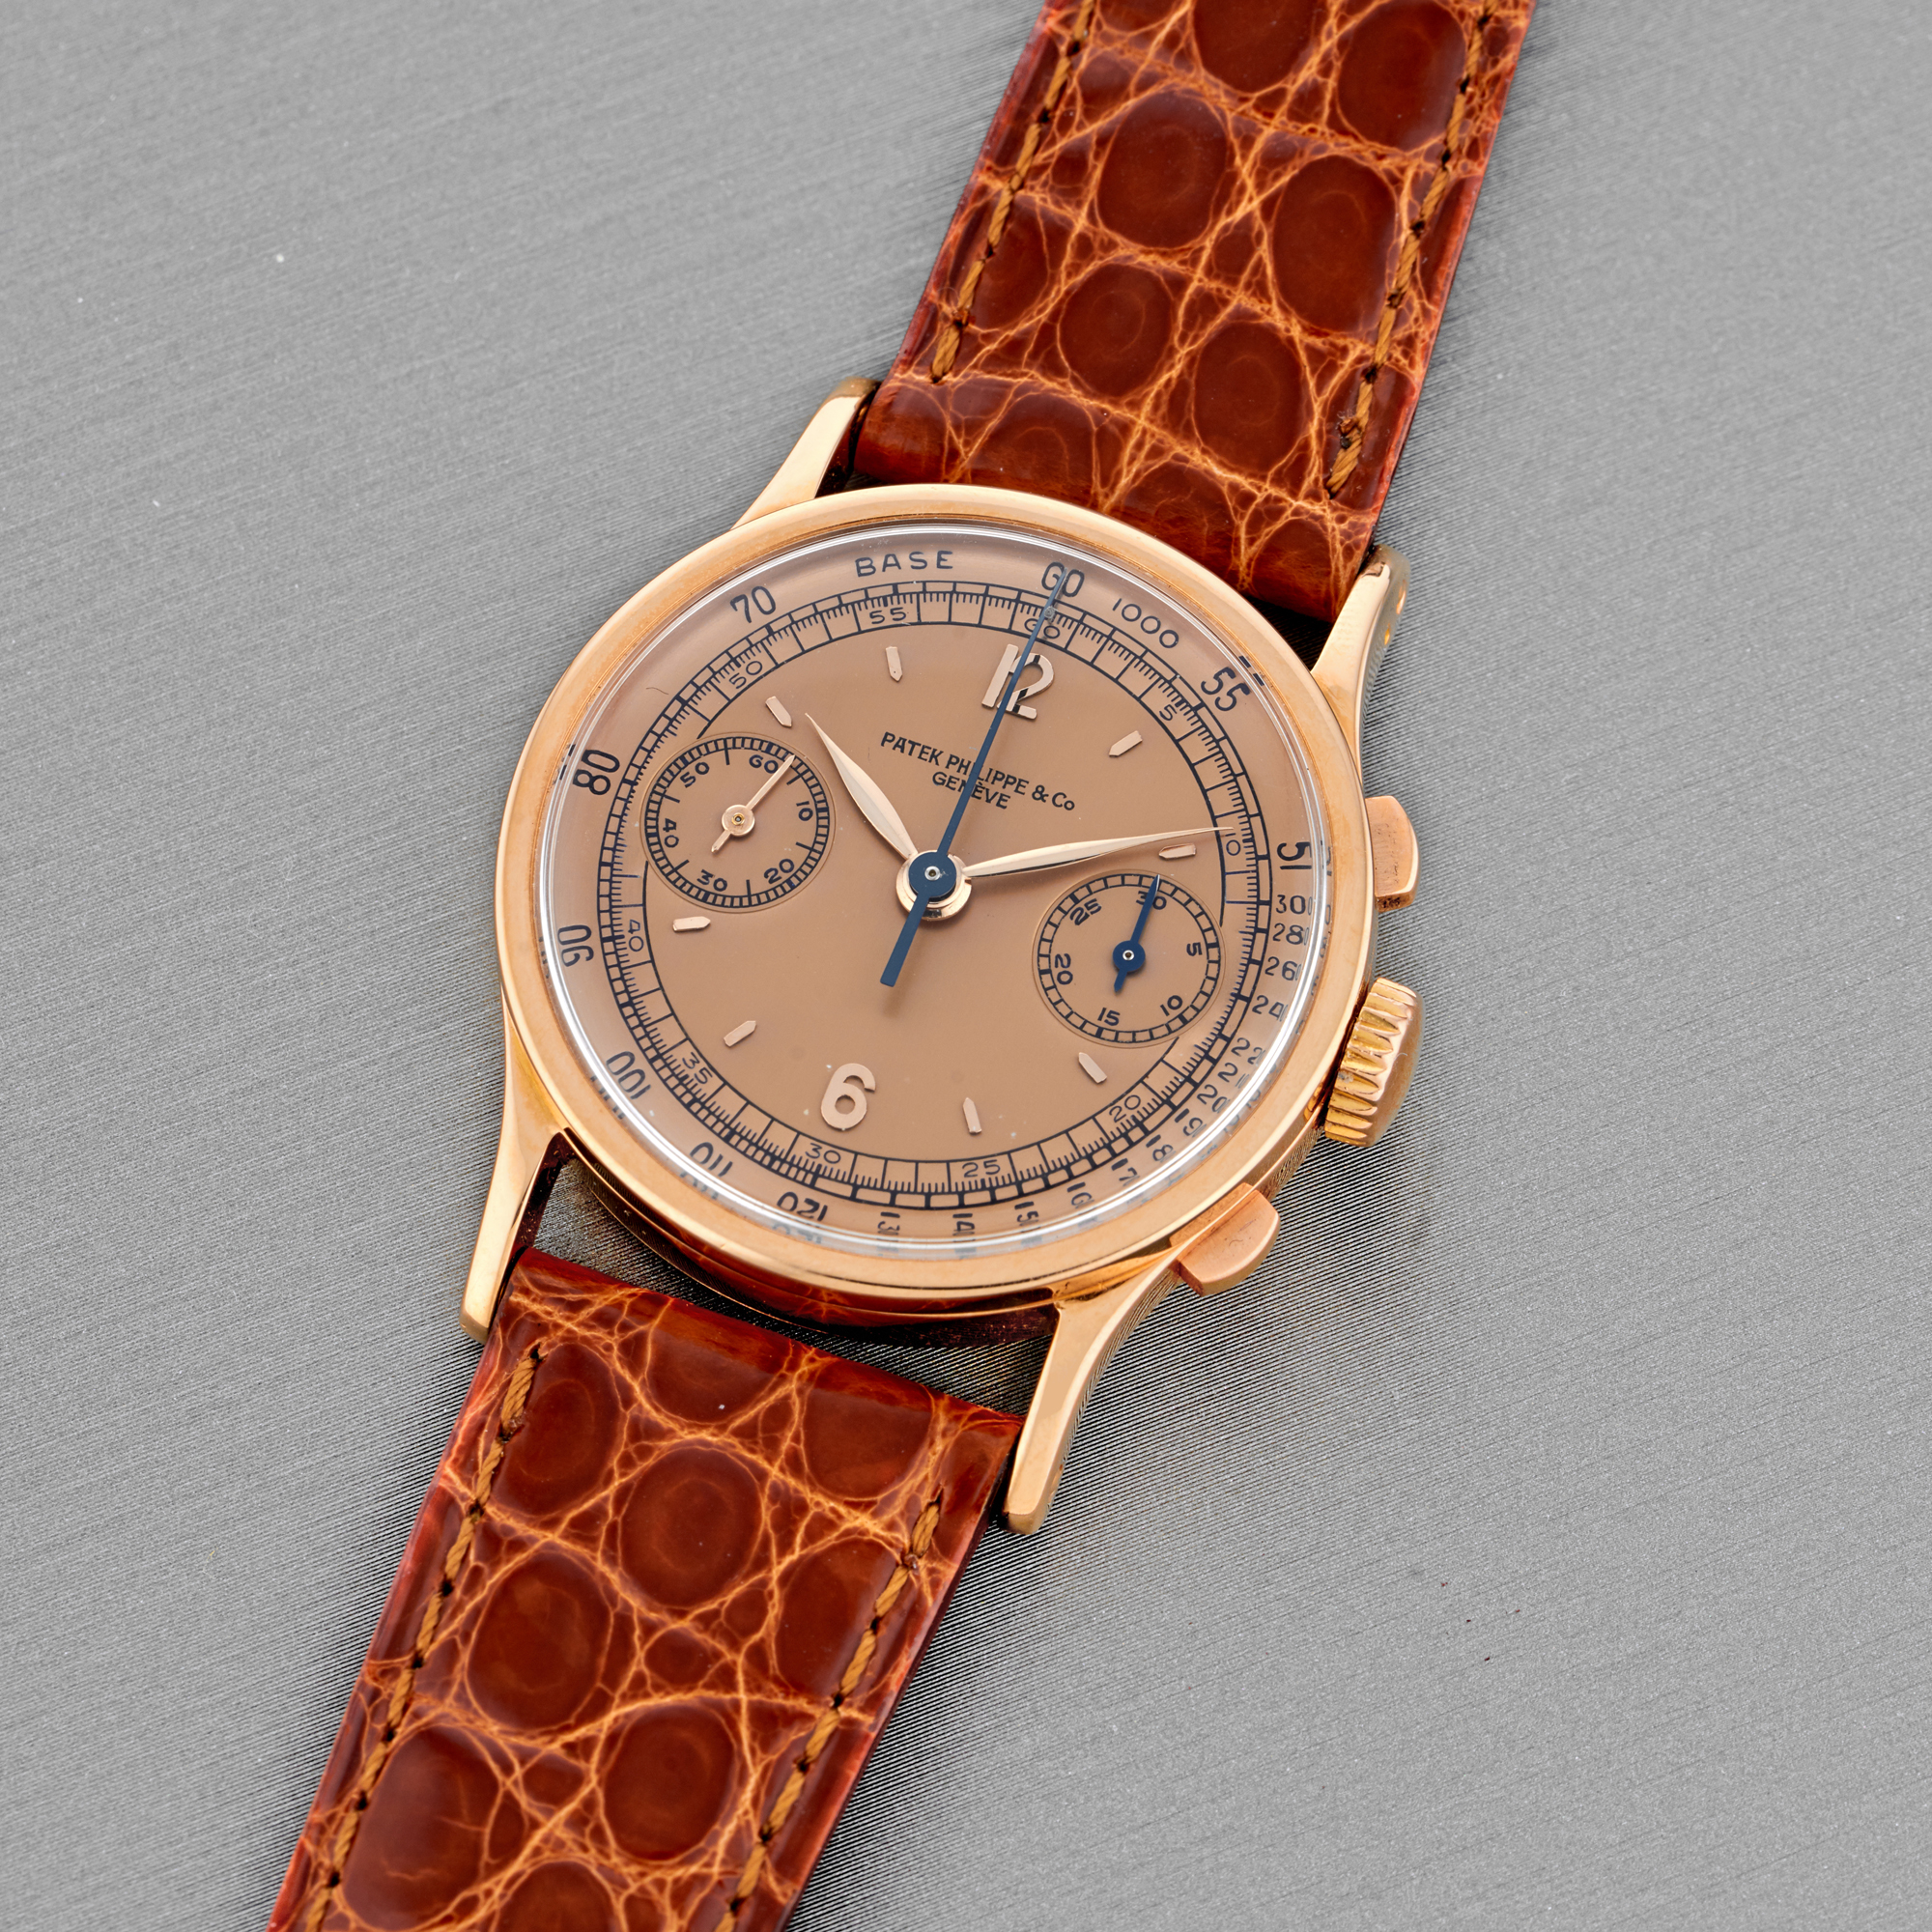 Patek Philippe. 18k rose gold ref.533R, manufactured in 1942 and sold in 1943